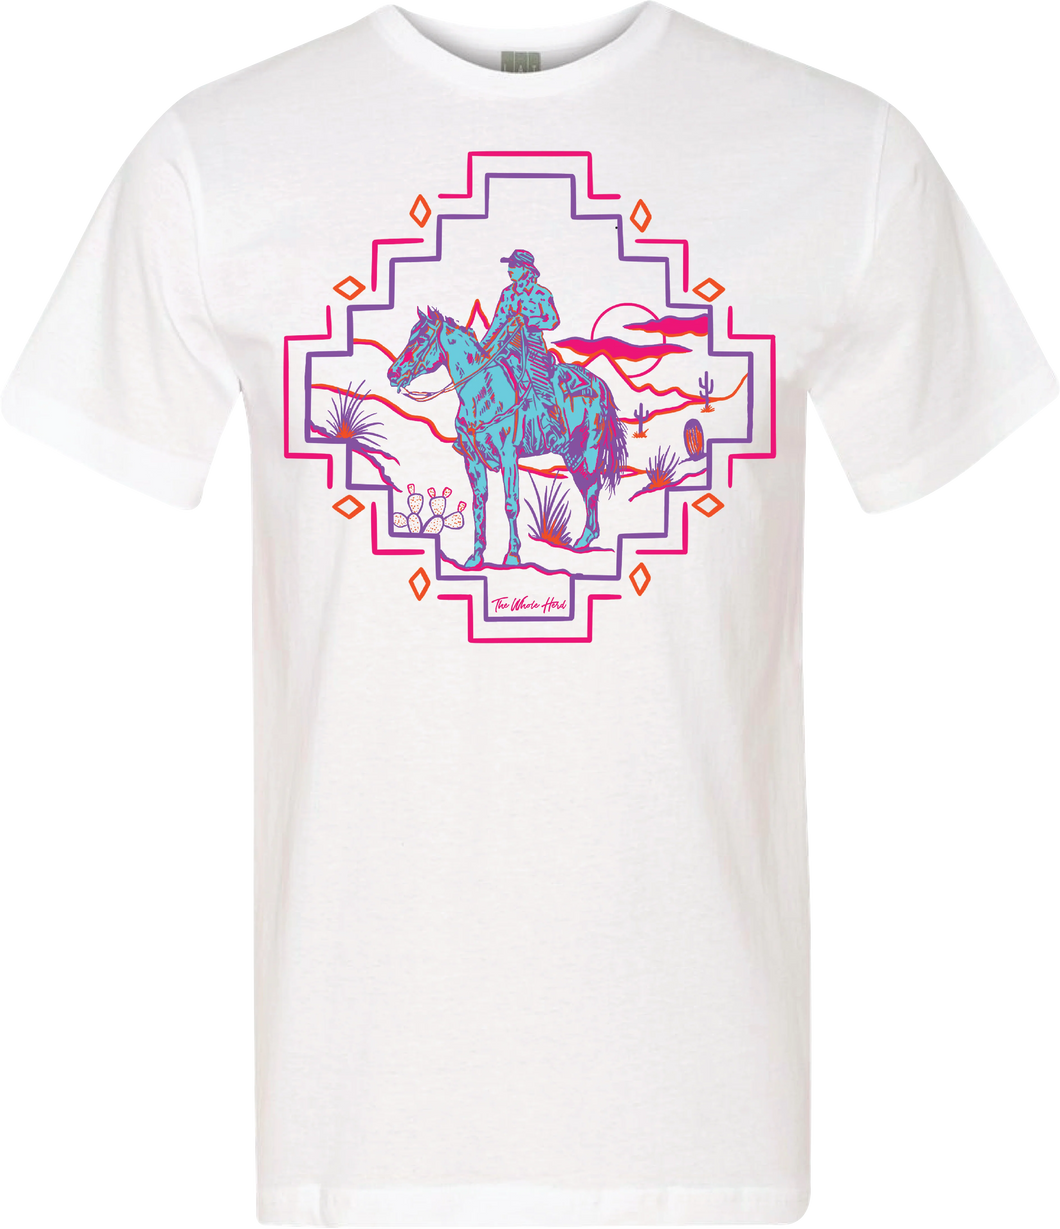 TWH Girl's Electric Cowgirl T-Shirt